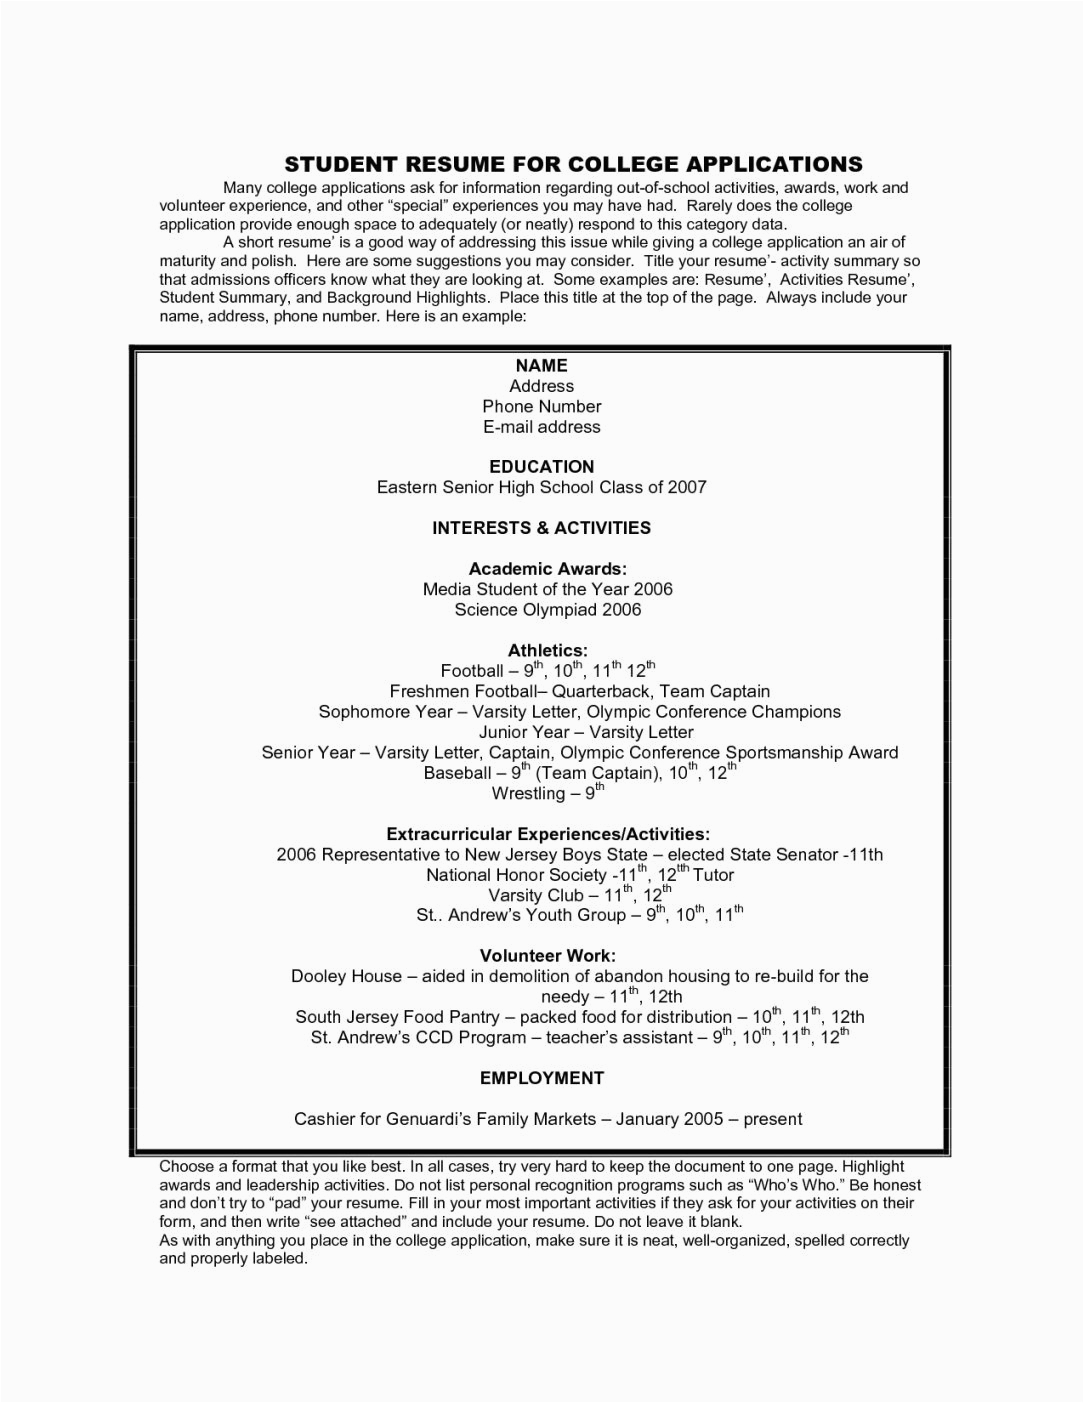 Resume Samples for High School Students Applying to College High School Resumes for College Applications